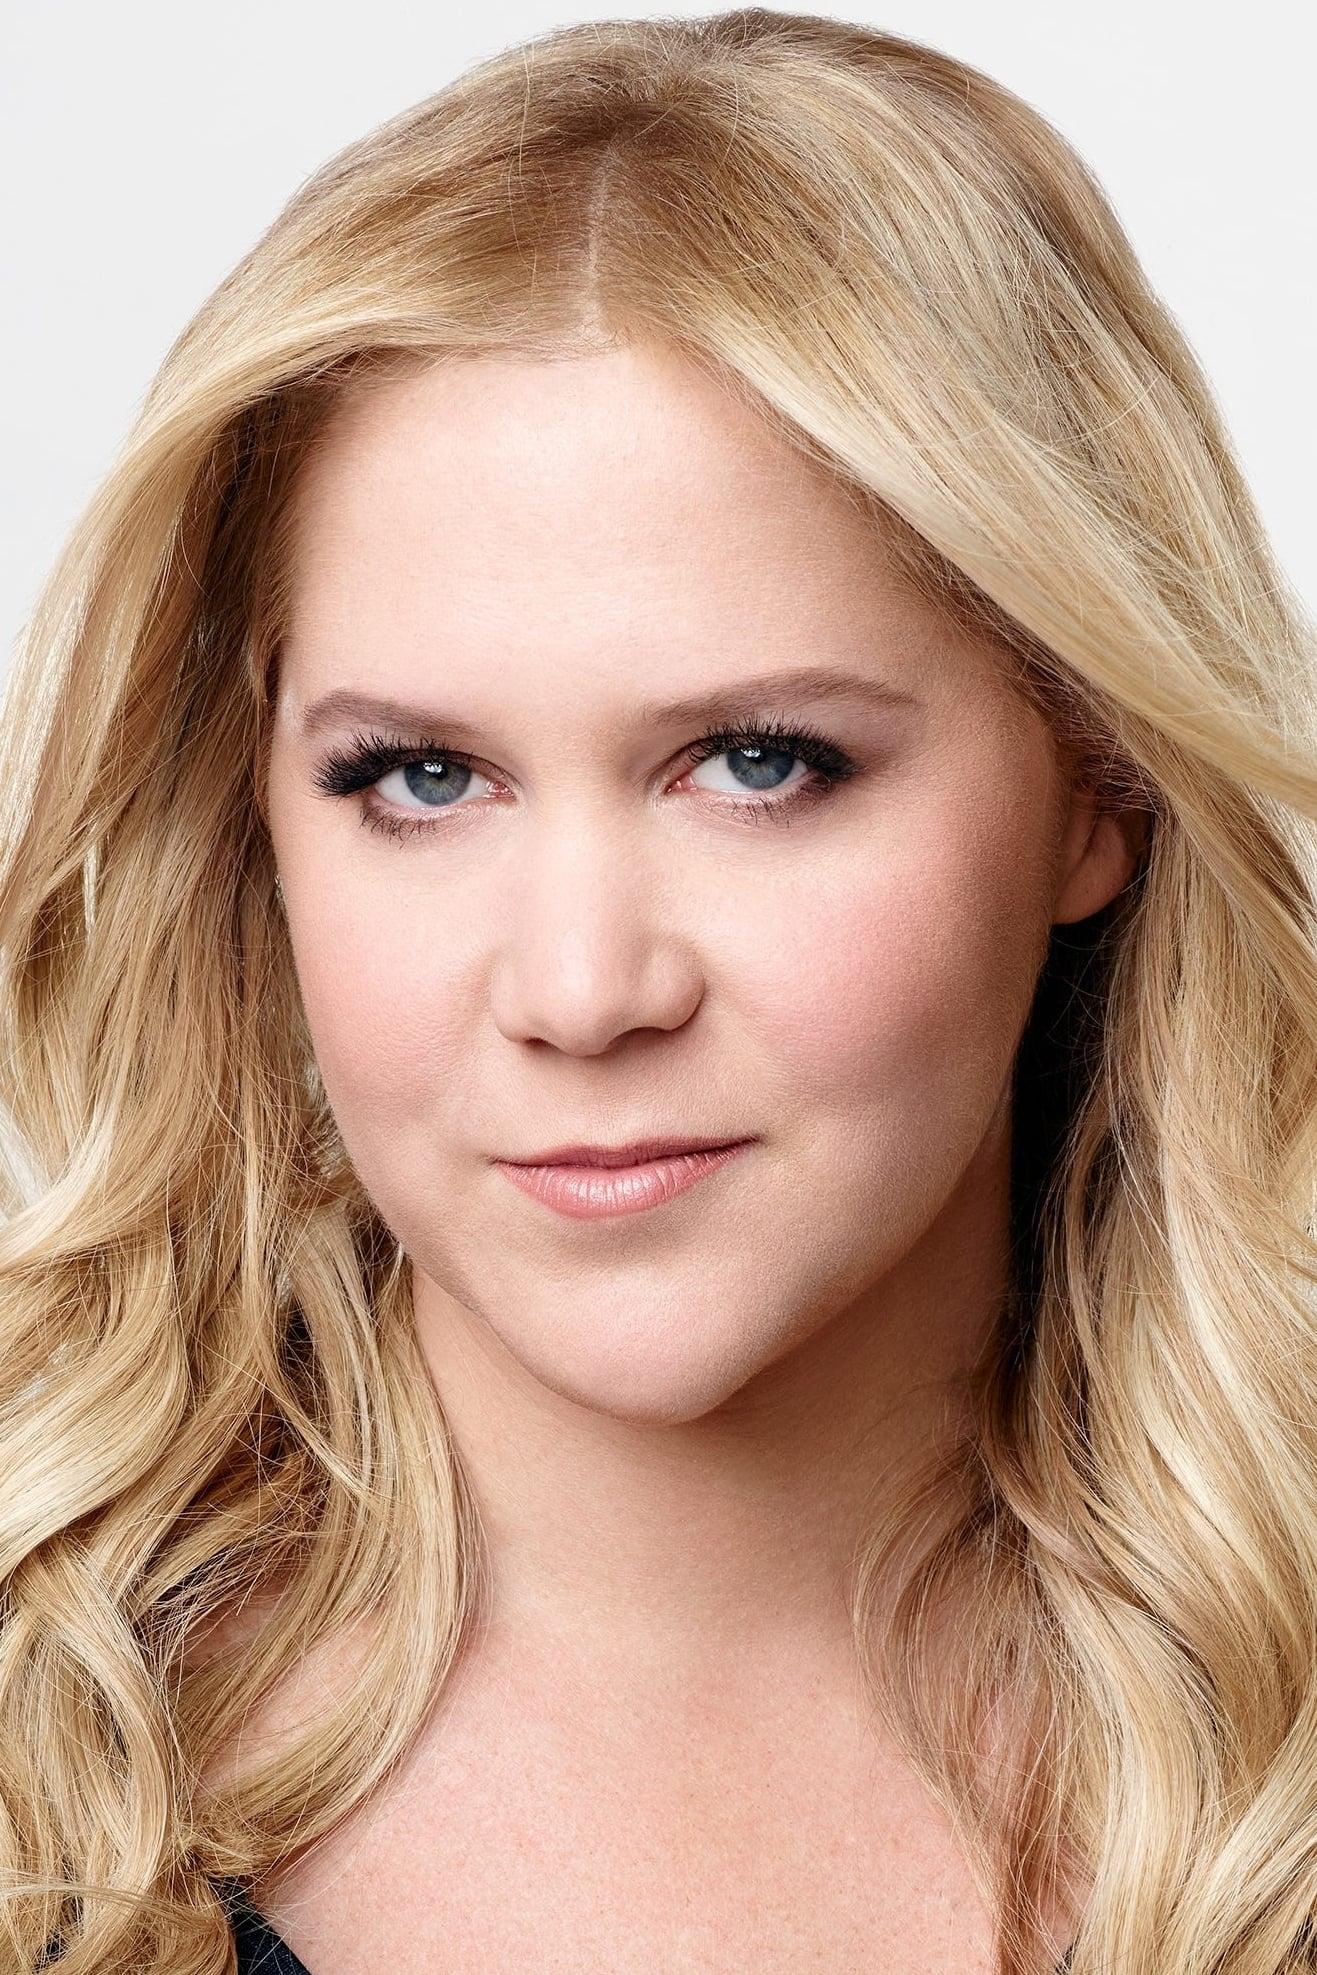 Amy Schumer | Woman #1 / Lacey